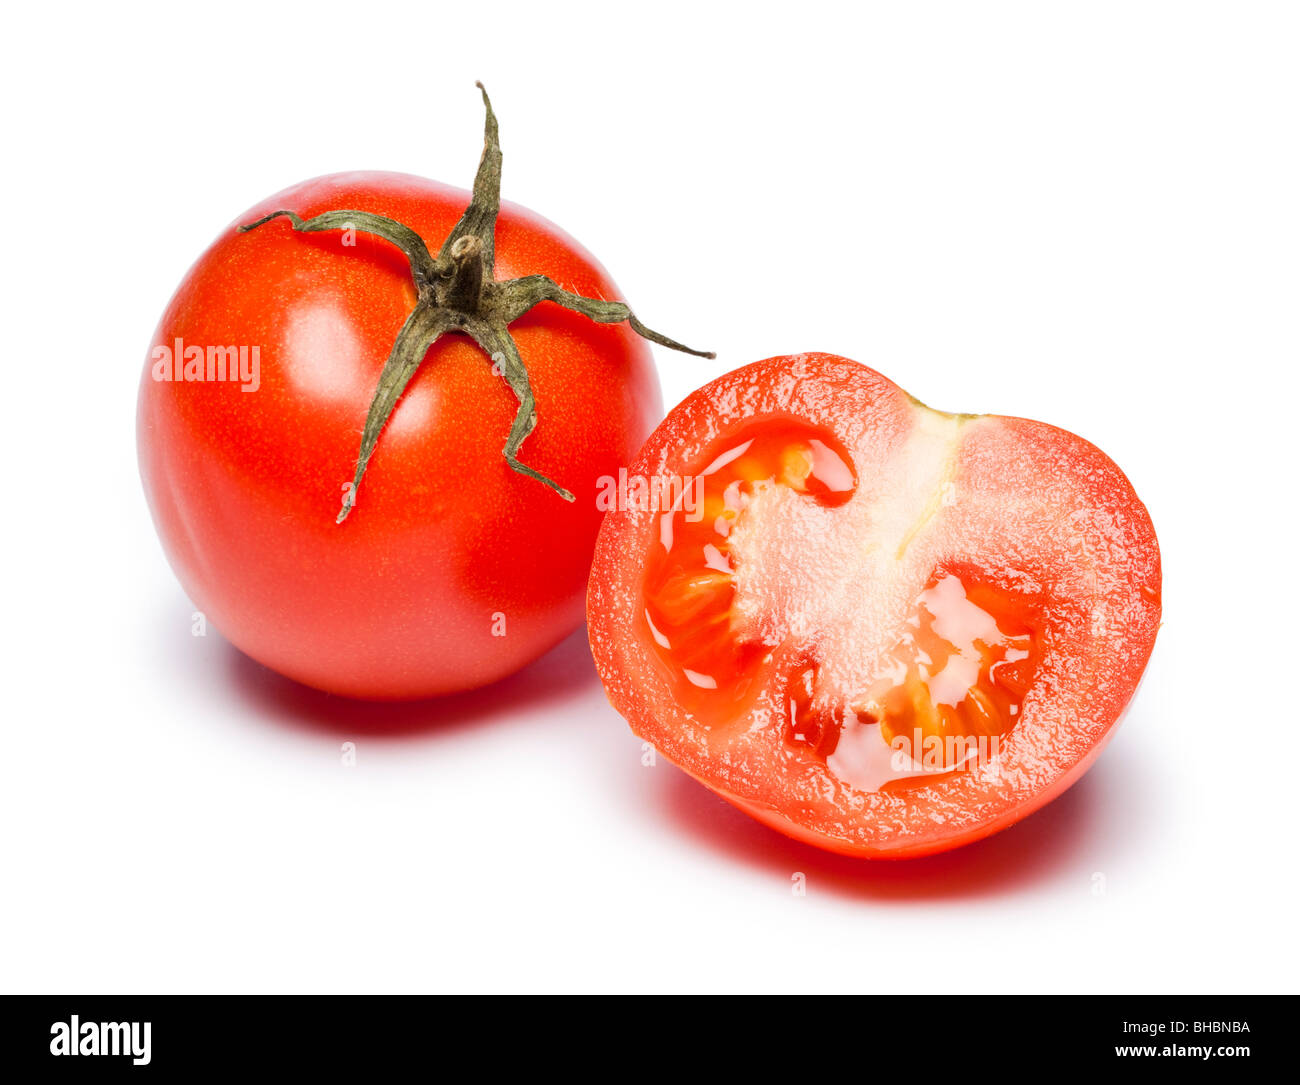 Tomatoes whole and halved Stock Photo